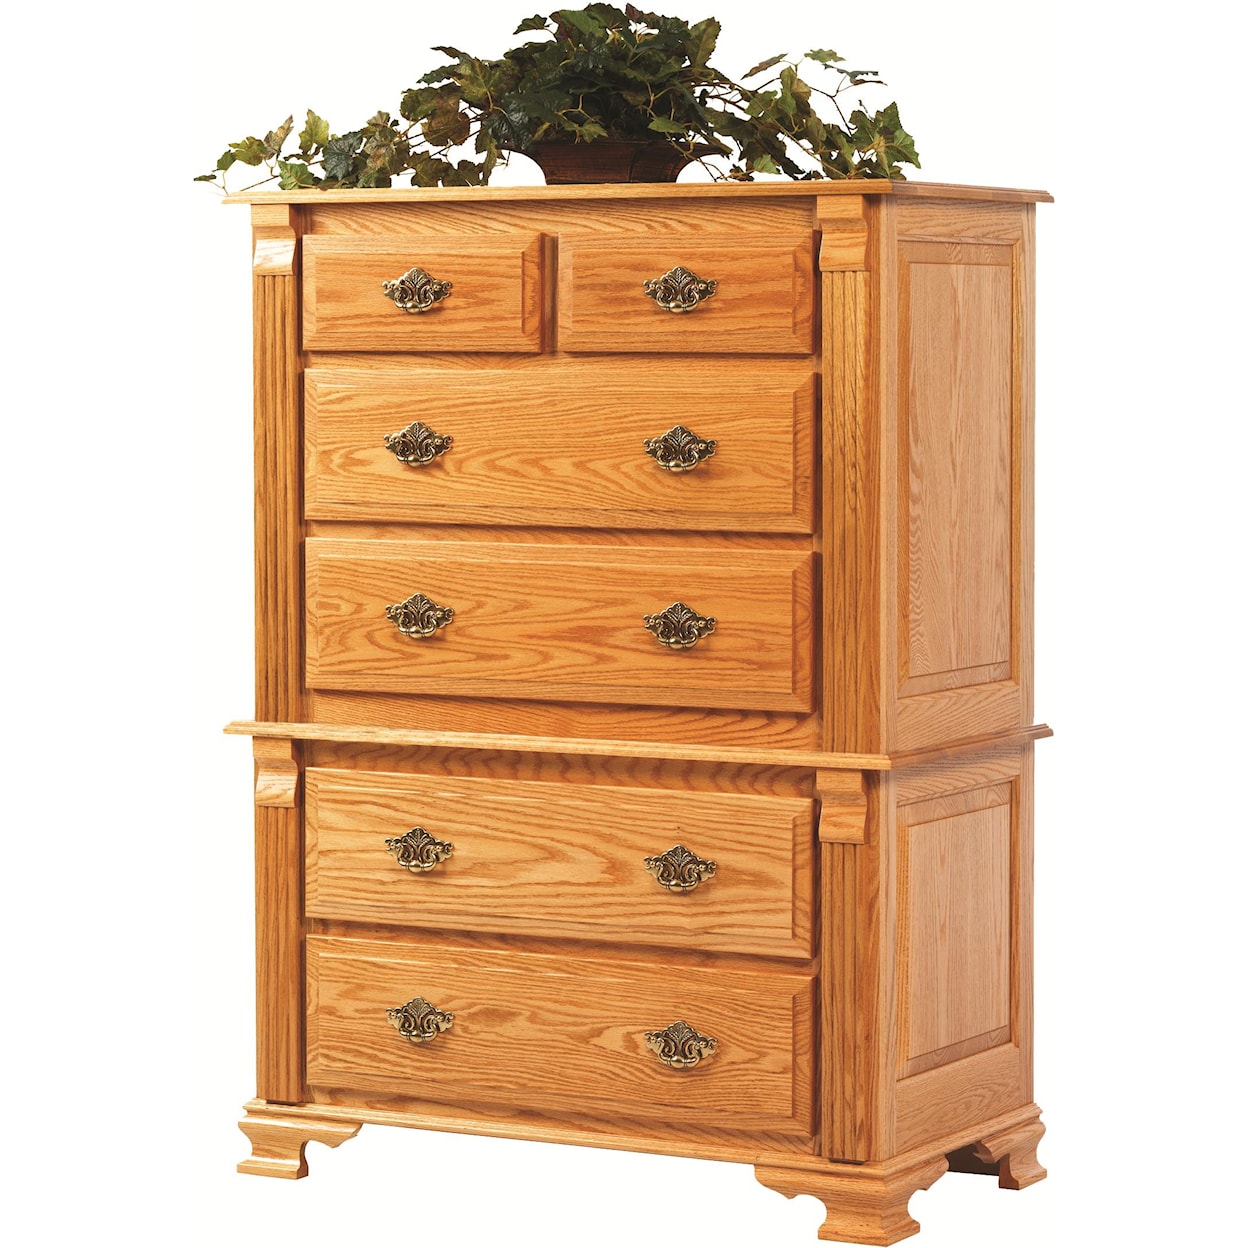 Millcraft Journeys End Chest of Drawers